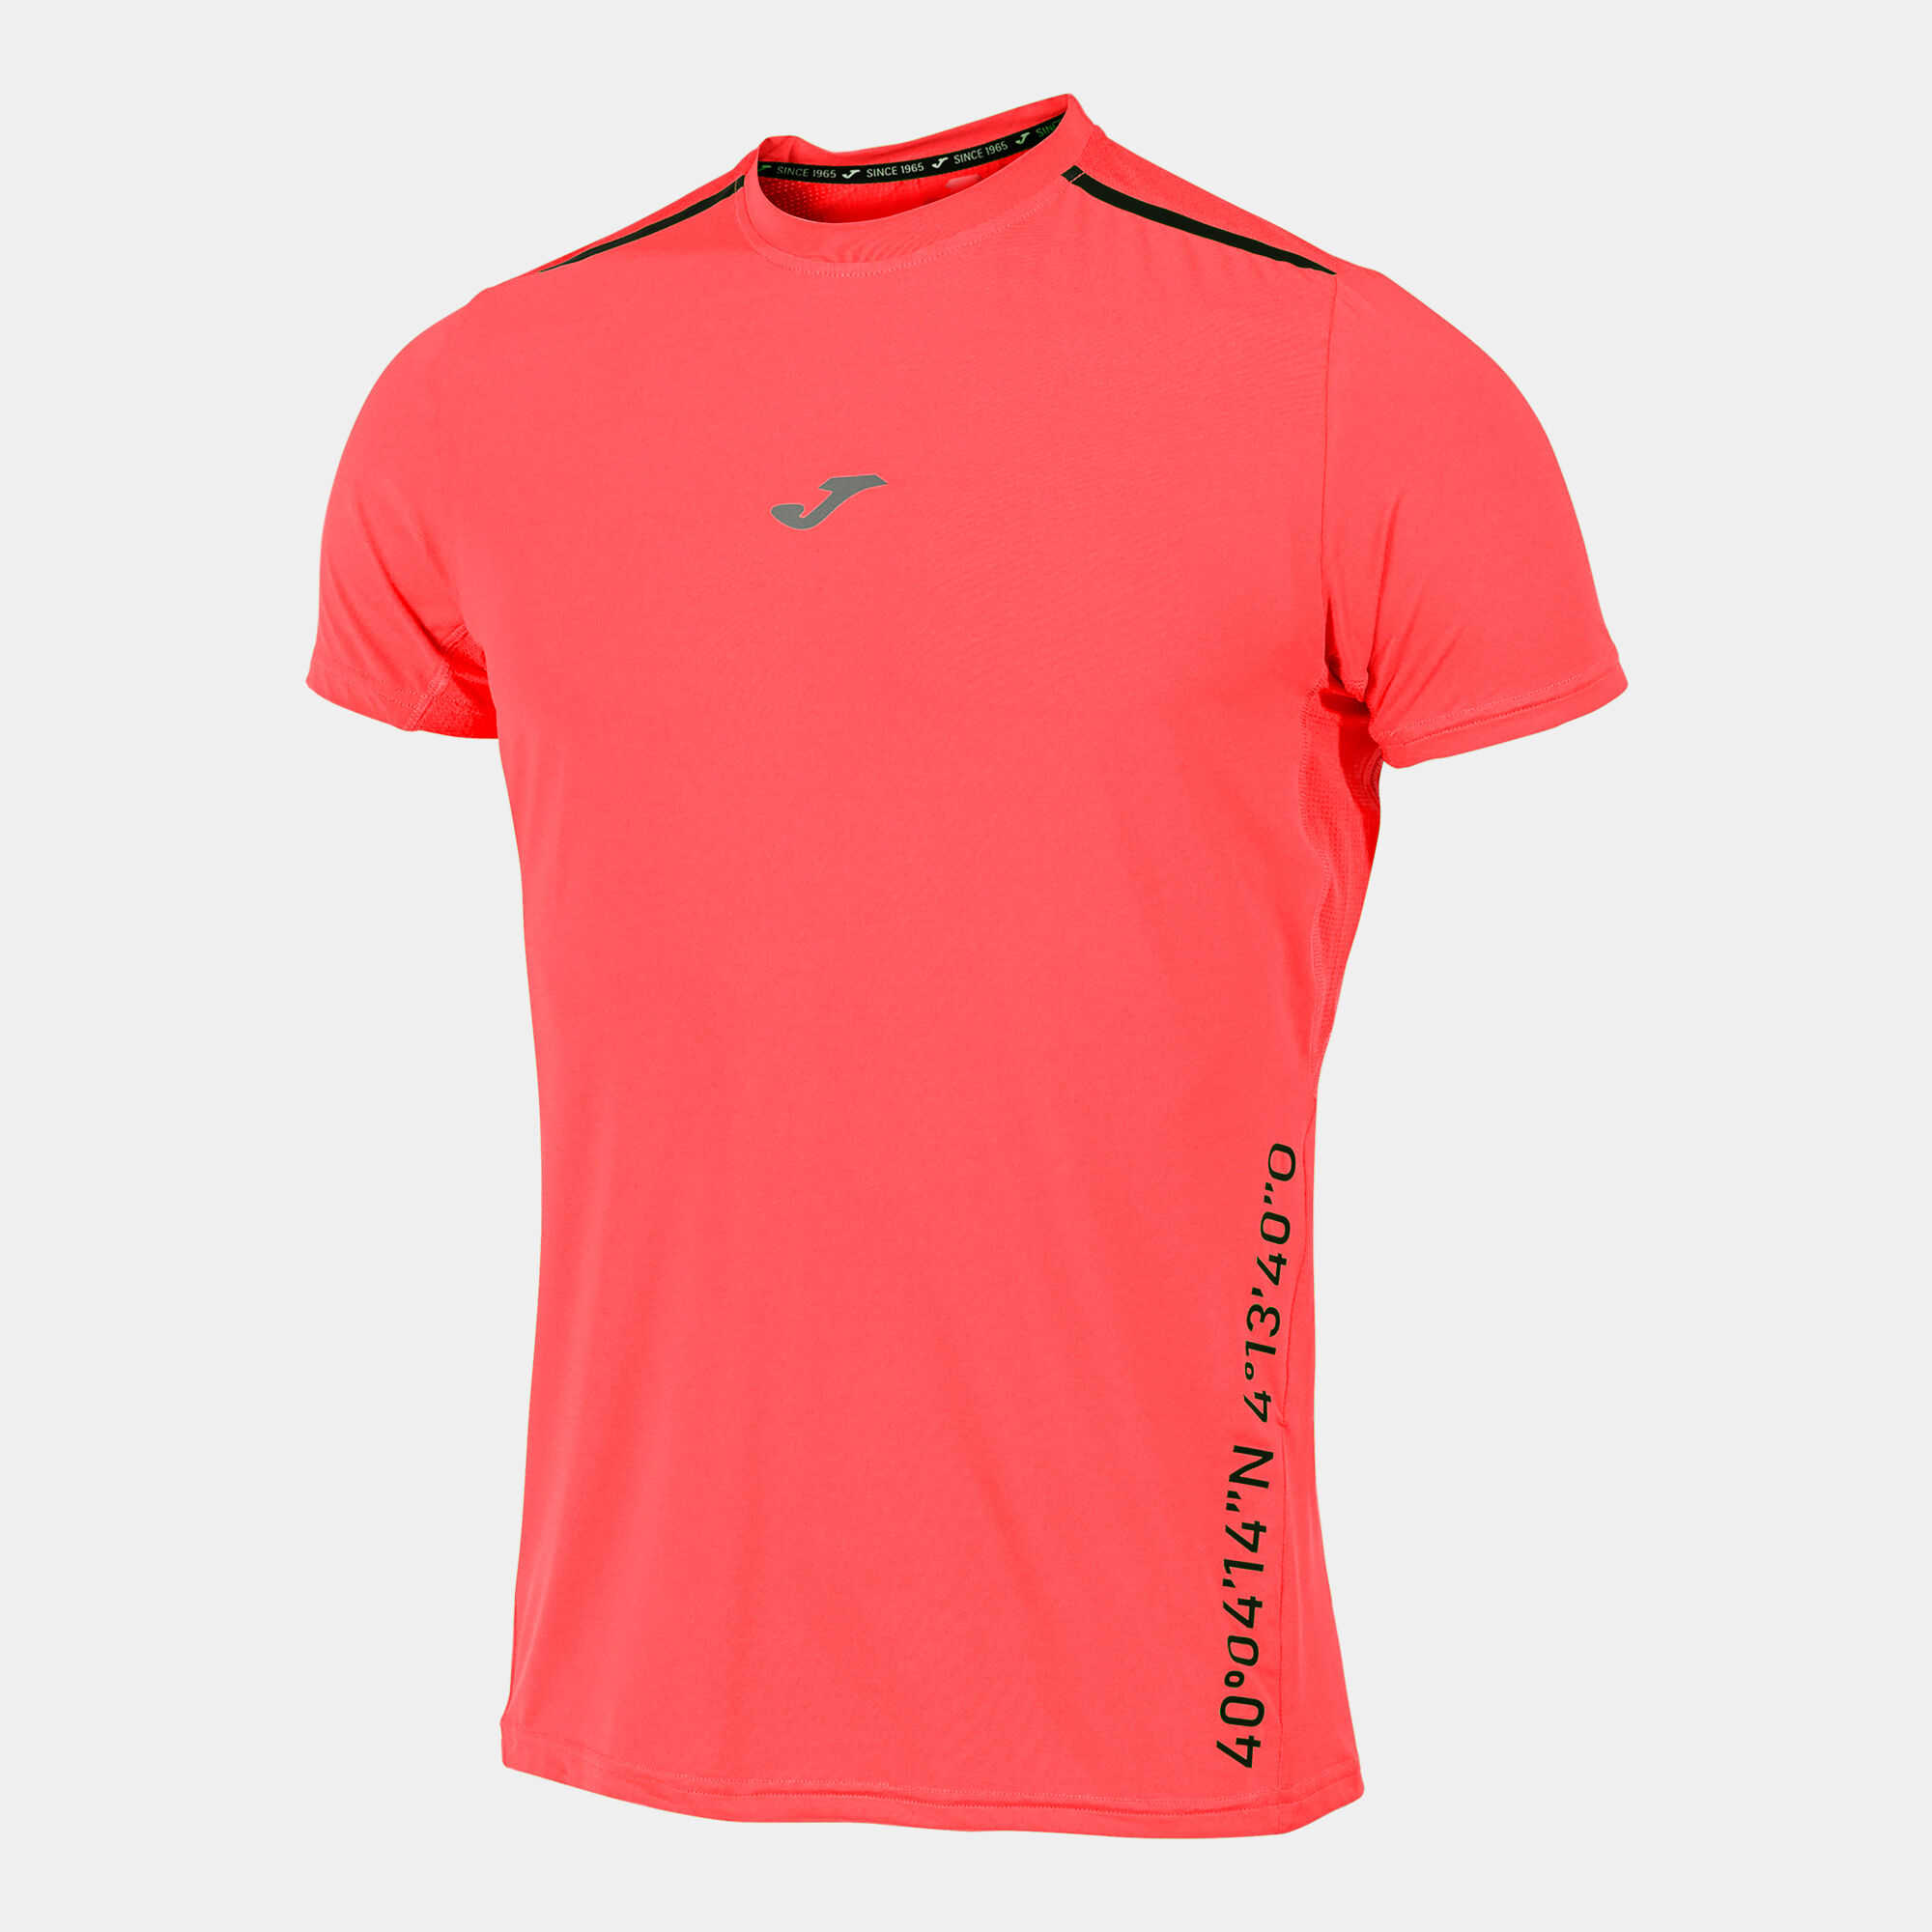 MAILLOT MANCHES COURTES HOMME R-CITY CORAIL FLUO